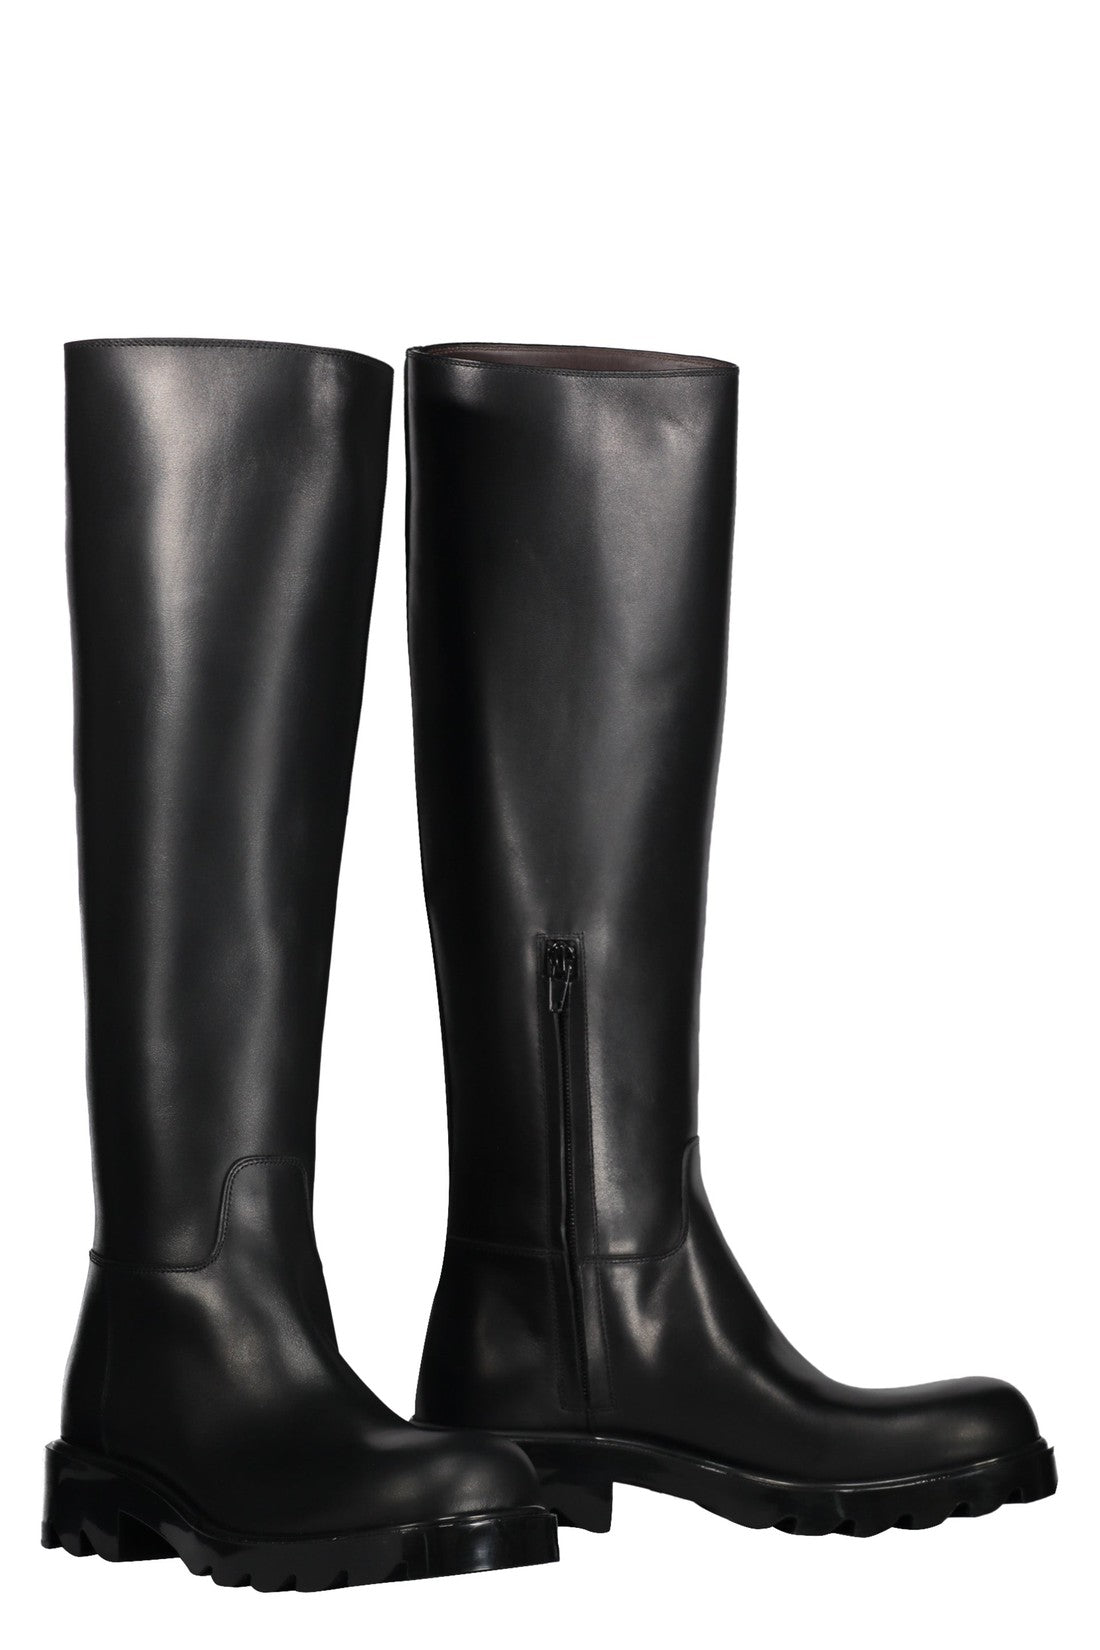 Strut leather boots